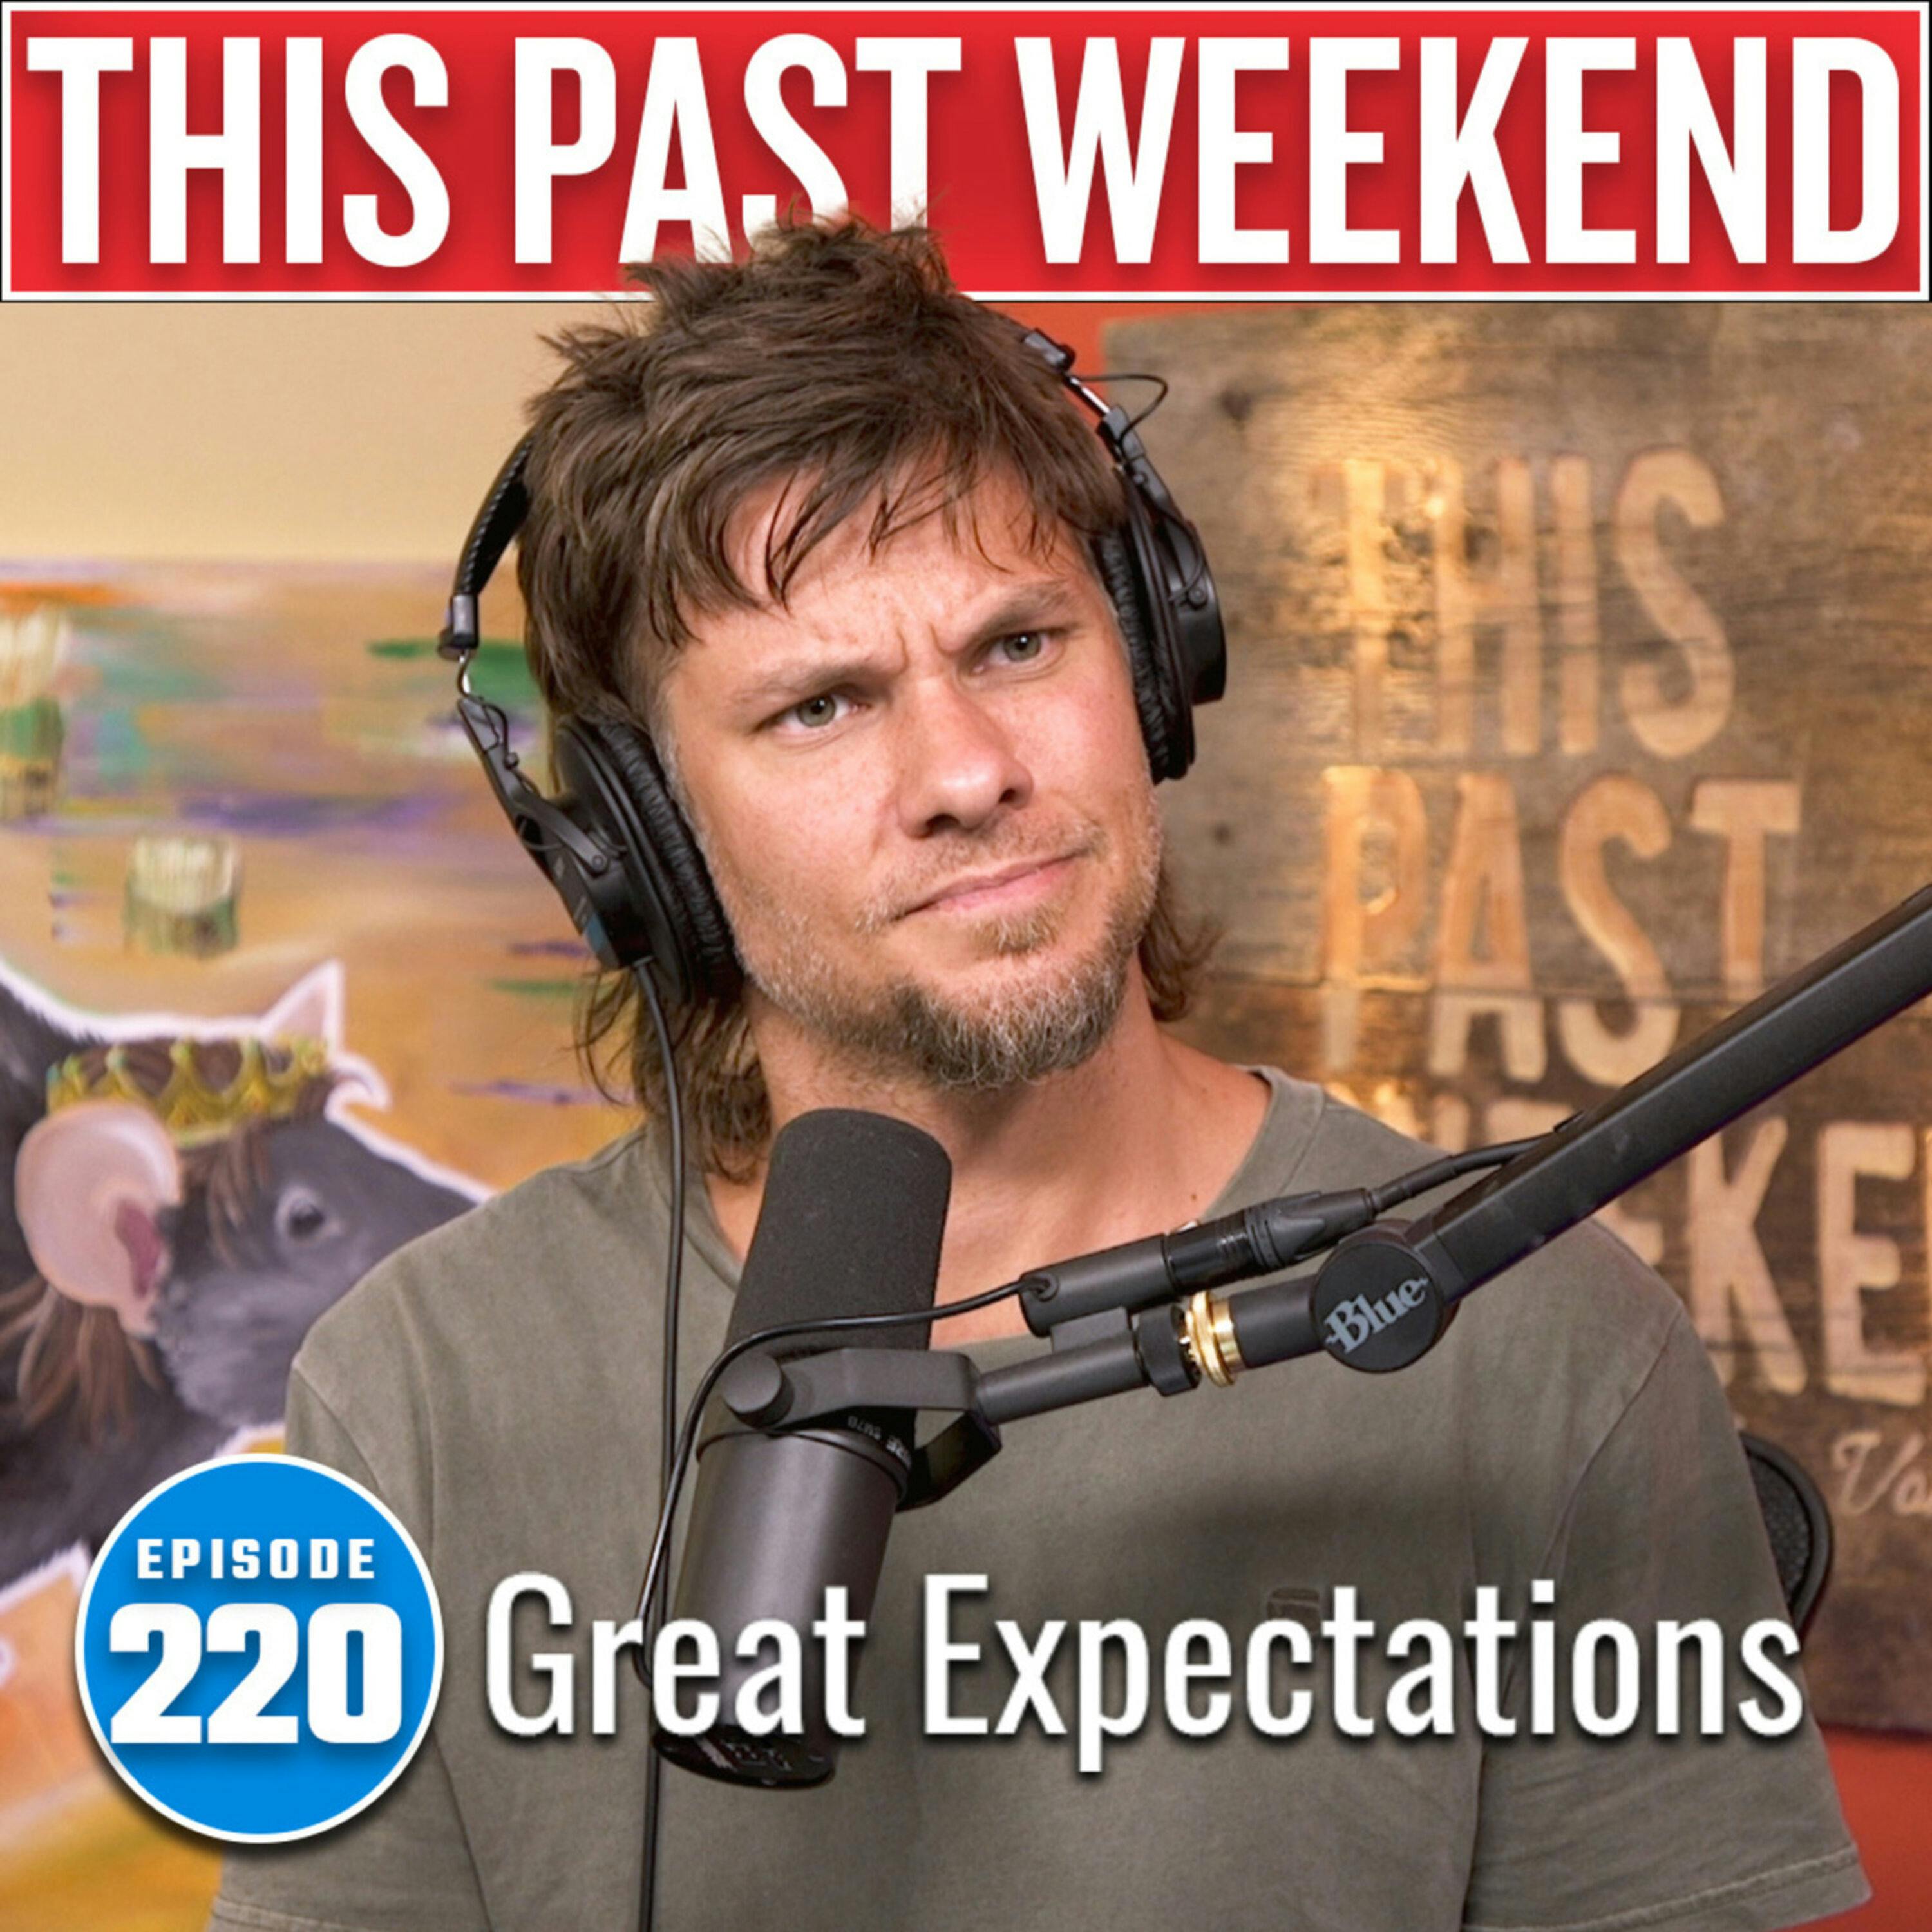 Great Expectations | This Past Weekend #220 by Theo Von